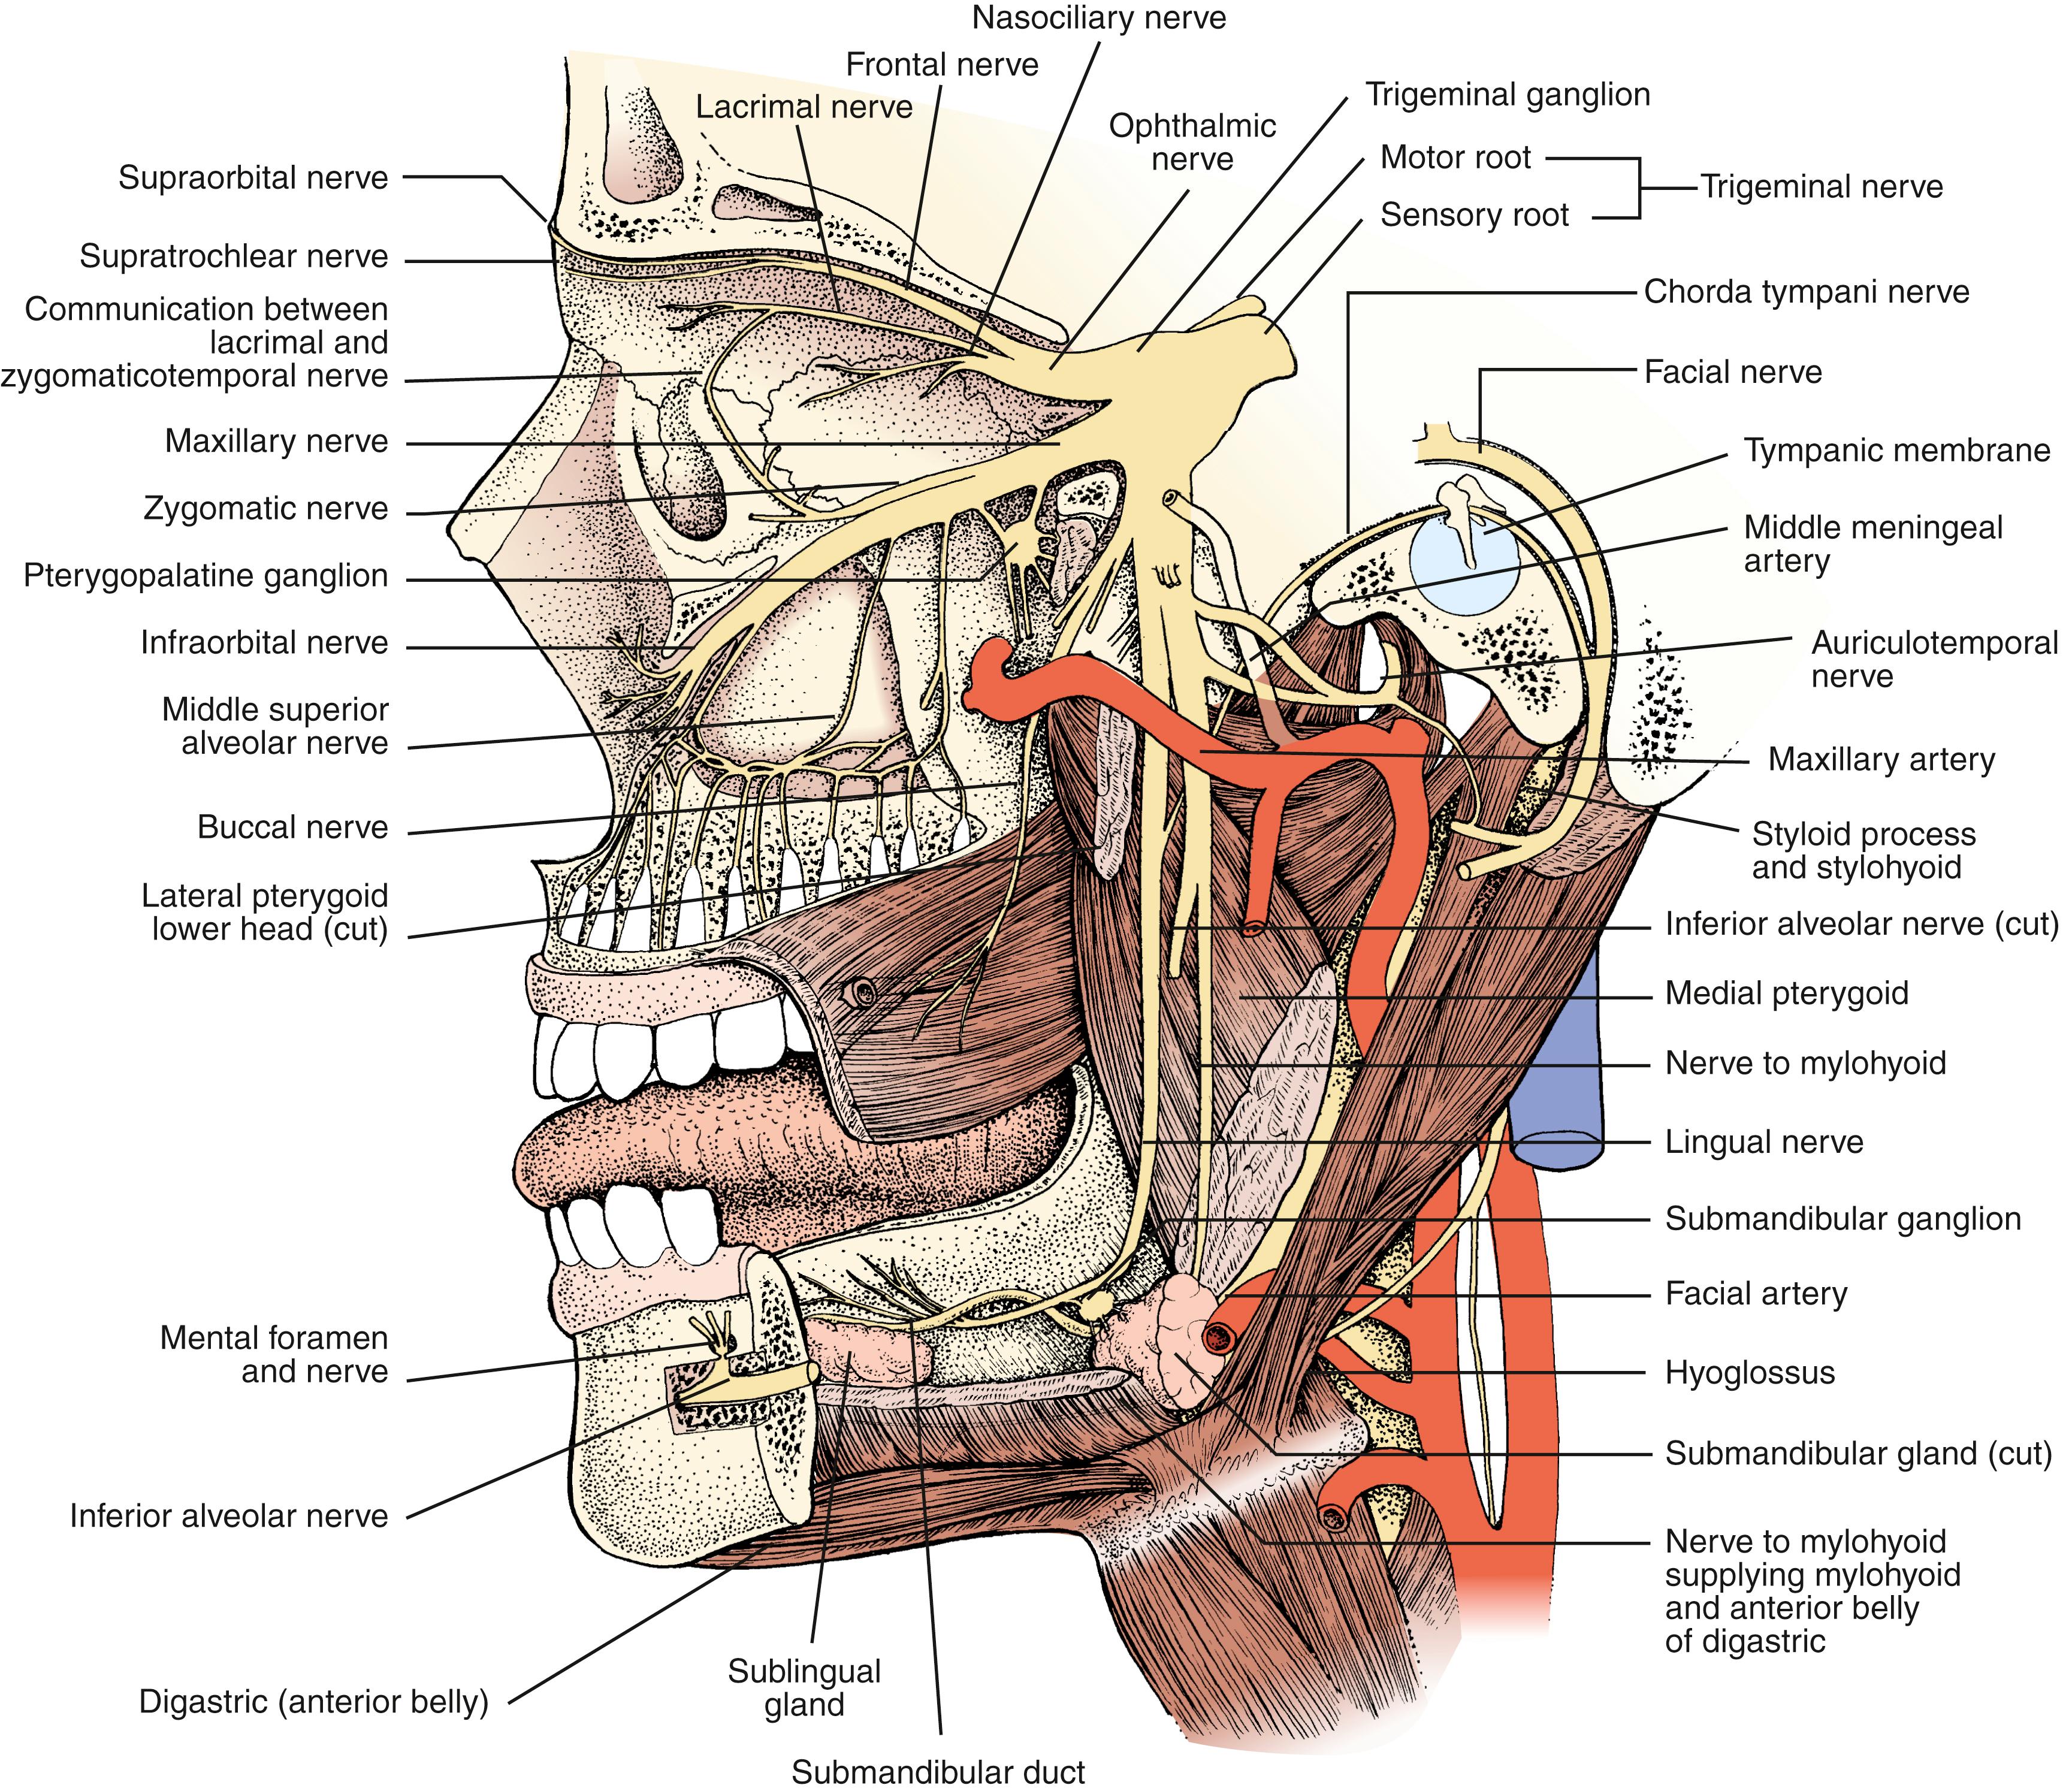 Fig. 103.7, Trigeminal nerve ophthalmic (1), maxillary (2), and mandibular (3) branches emerging from the semilunar (trigeminal or gasserian) ganglion.